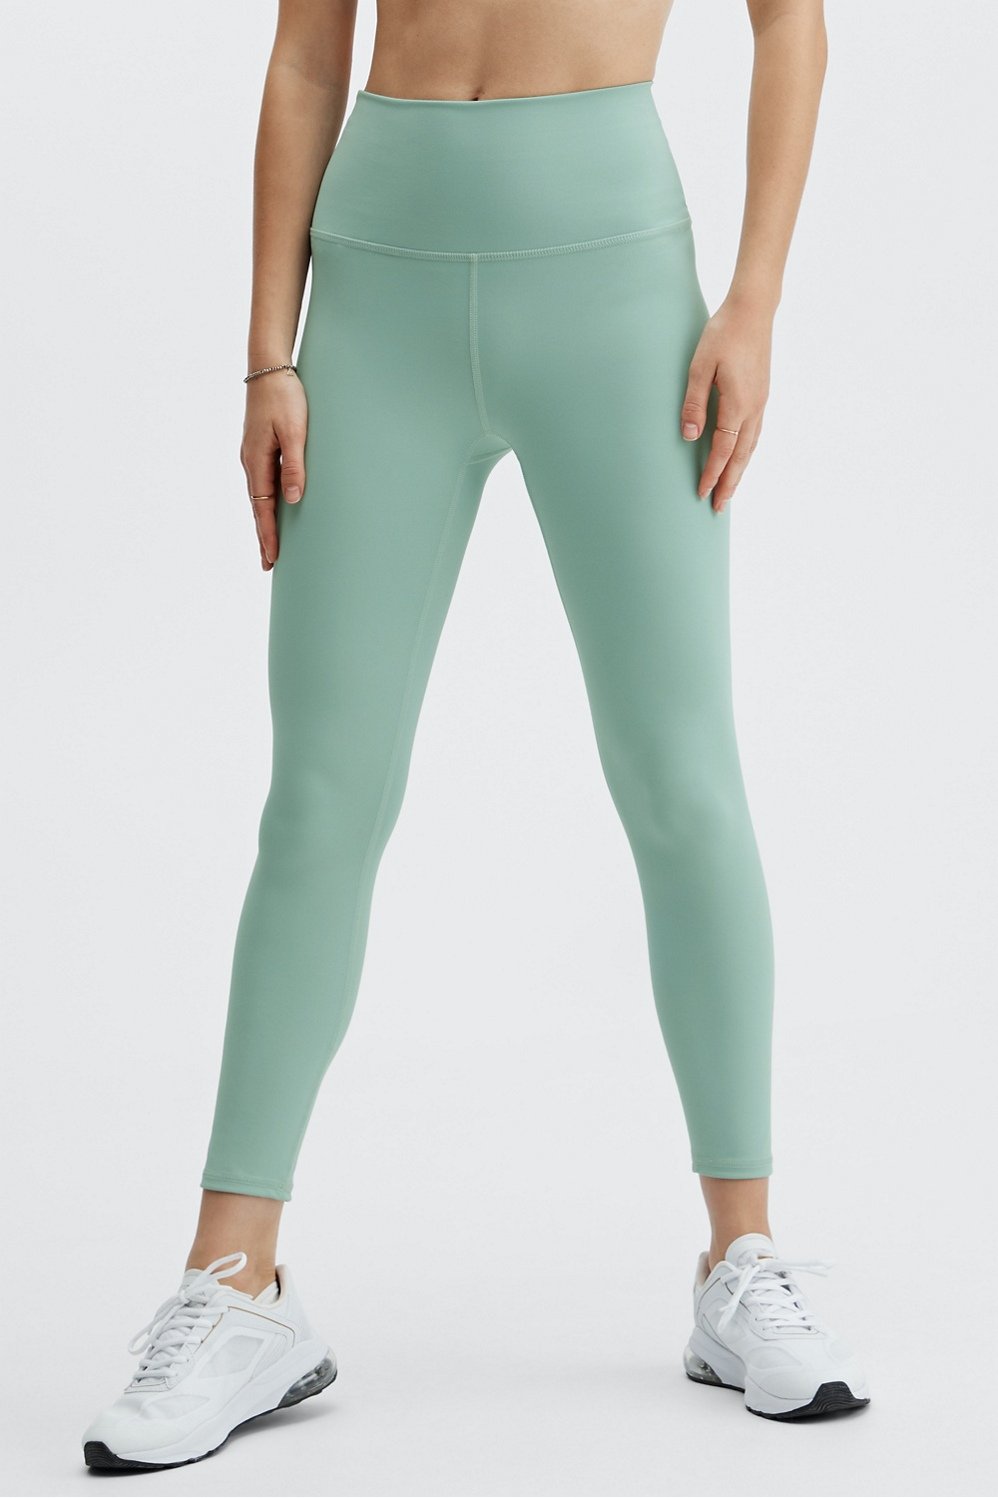 Fabletics PureLuxe Ultra High-Waisted 7/8 Legging!NWT